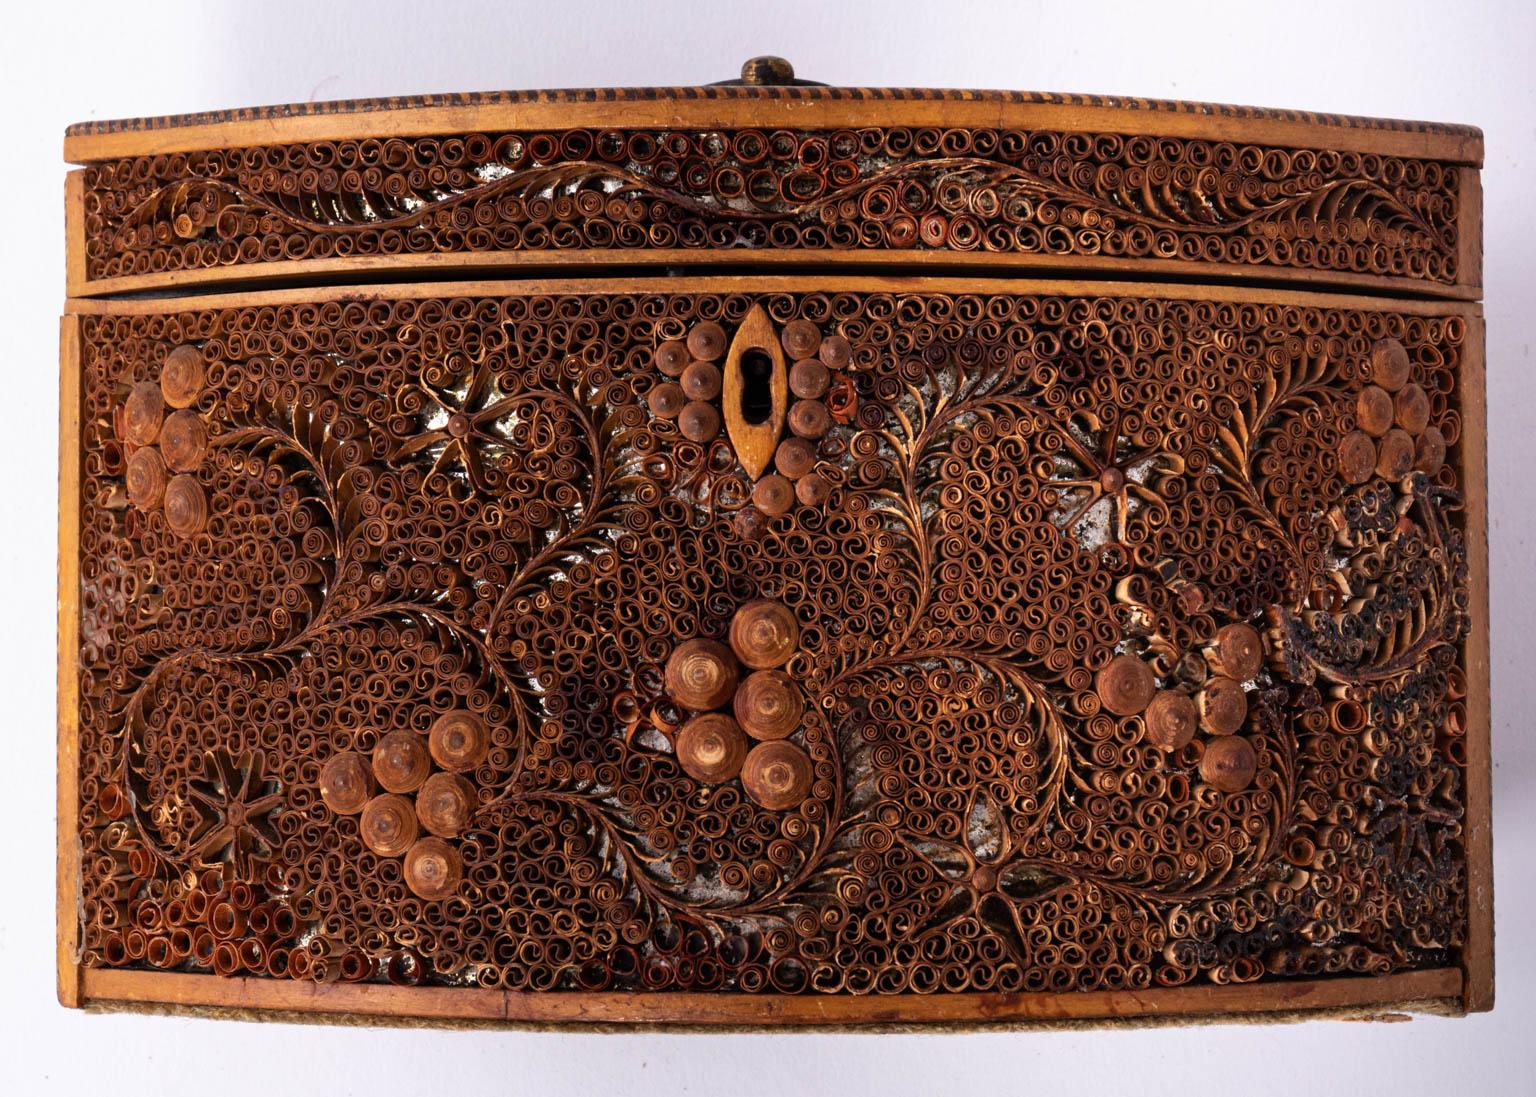 Pointed coiled paper oval tea caddy, circa 1800. Made by a student named Mary Hammond from Miss Miles School. Artist-signed. Please note of wear consistent with age.